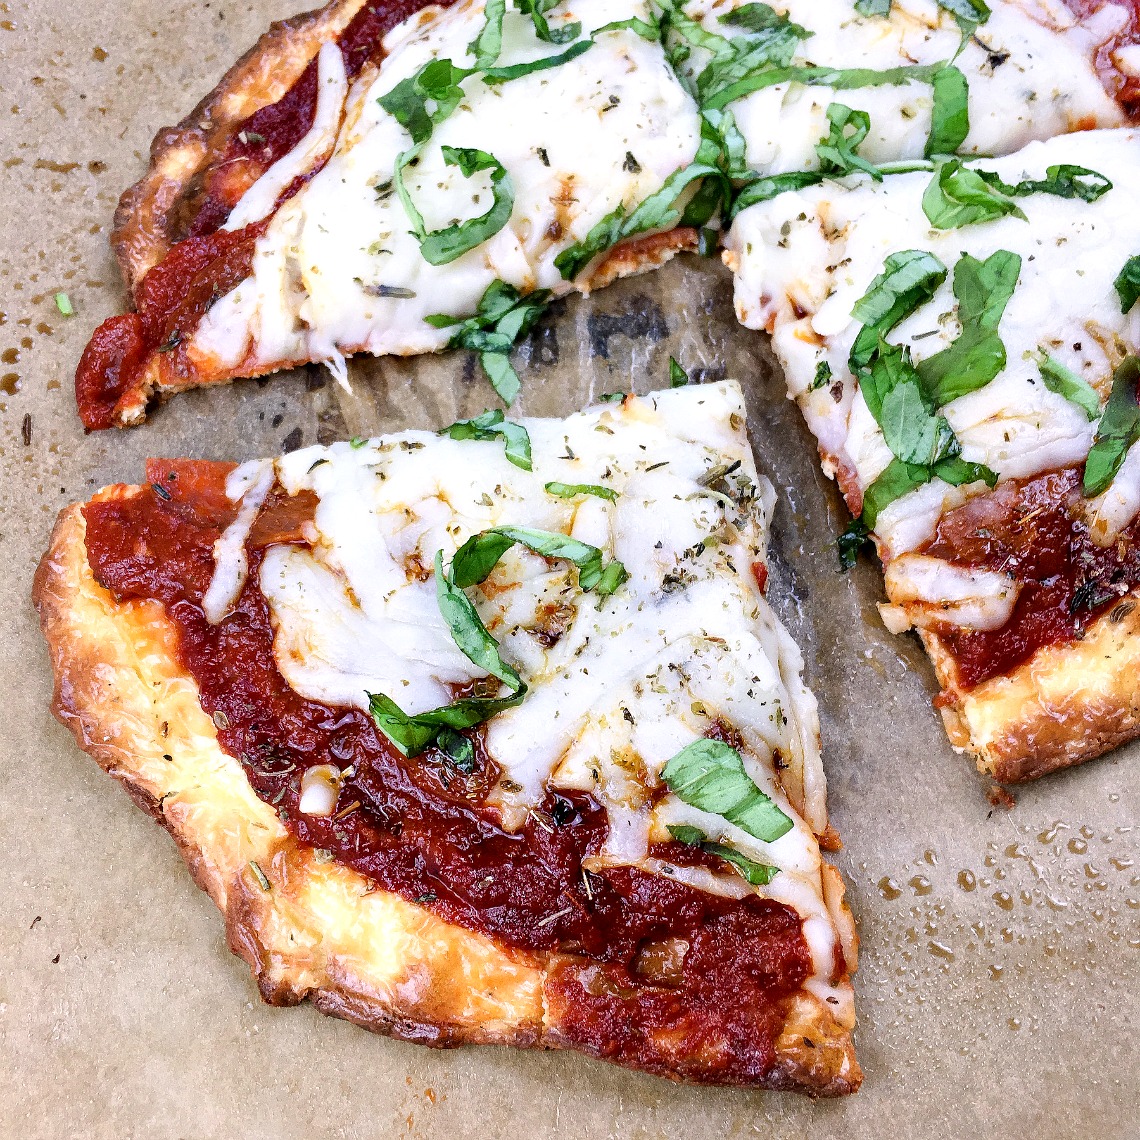 Are you looking for a low carb pizza recipes you can enjoy on the ketogenic diet? Our easy weeknight keto pepperoni pizza is delicious to bake.